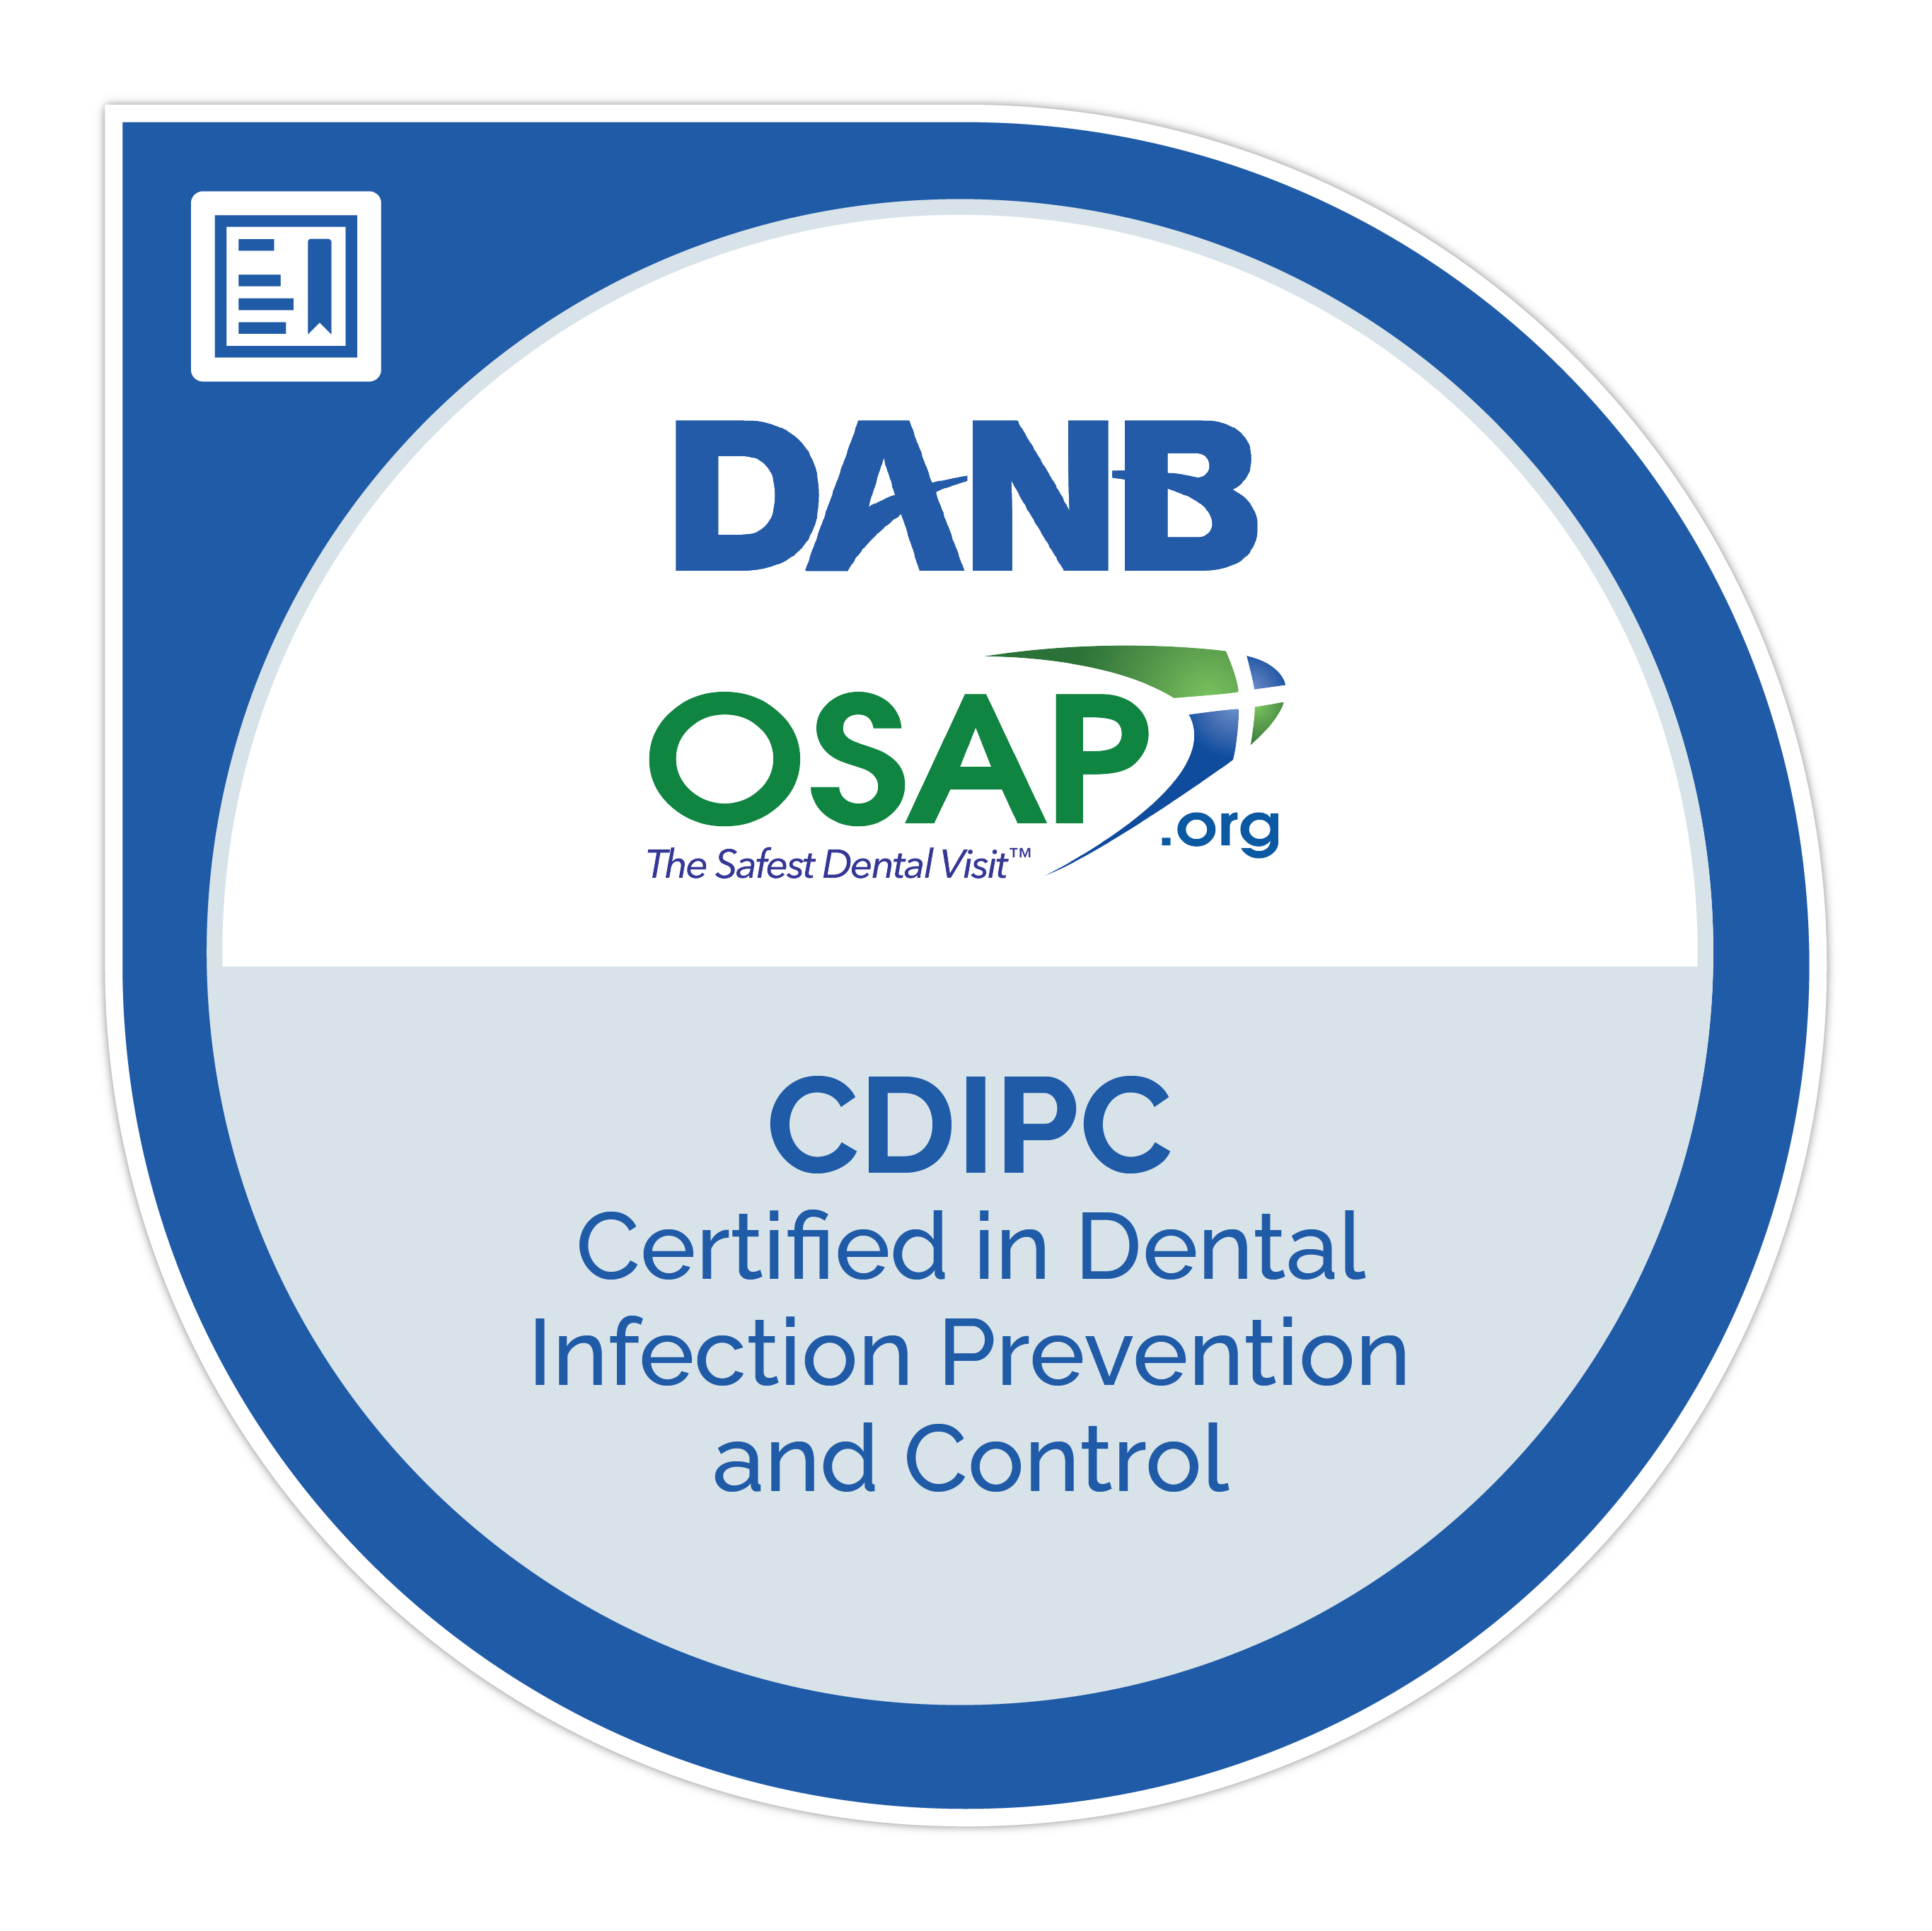 CDIPC - Certified in Dental Infection Prevention and Control